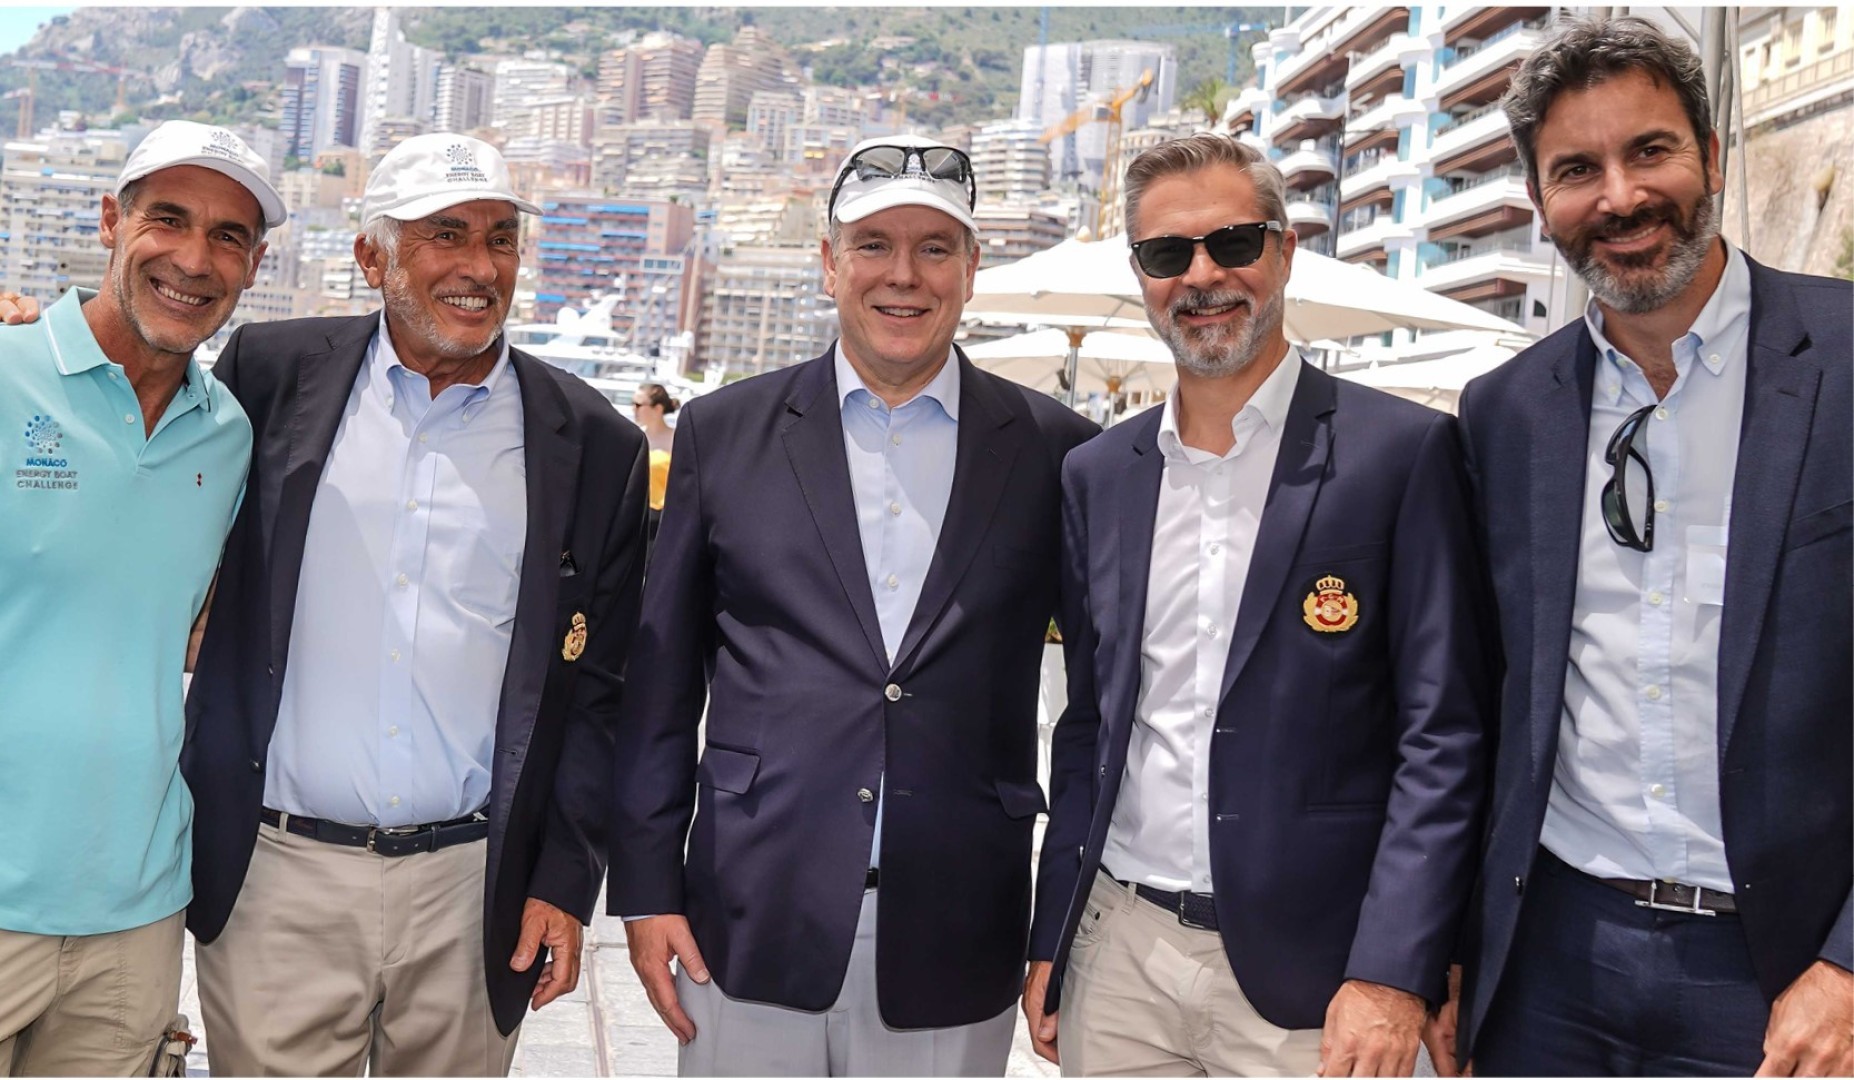 HSH Prince Albert II of Monaco surrounded (l-r) by 
Mike Horn, Bernard d'Alessandri, Michel Buffat and Jérémie Lagarrigue